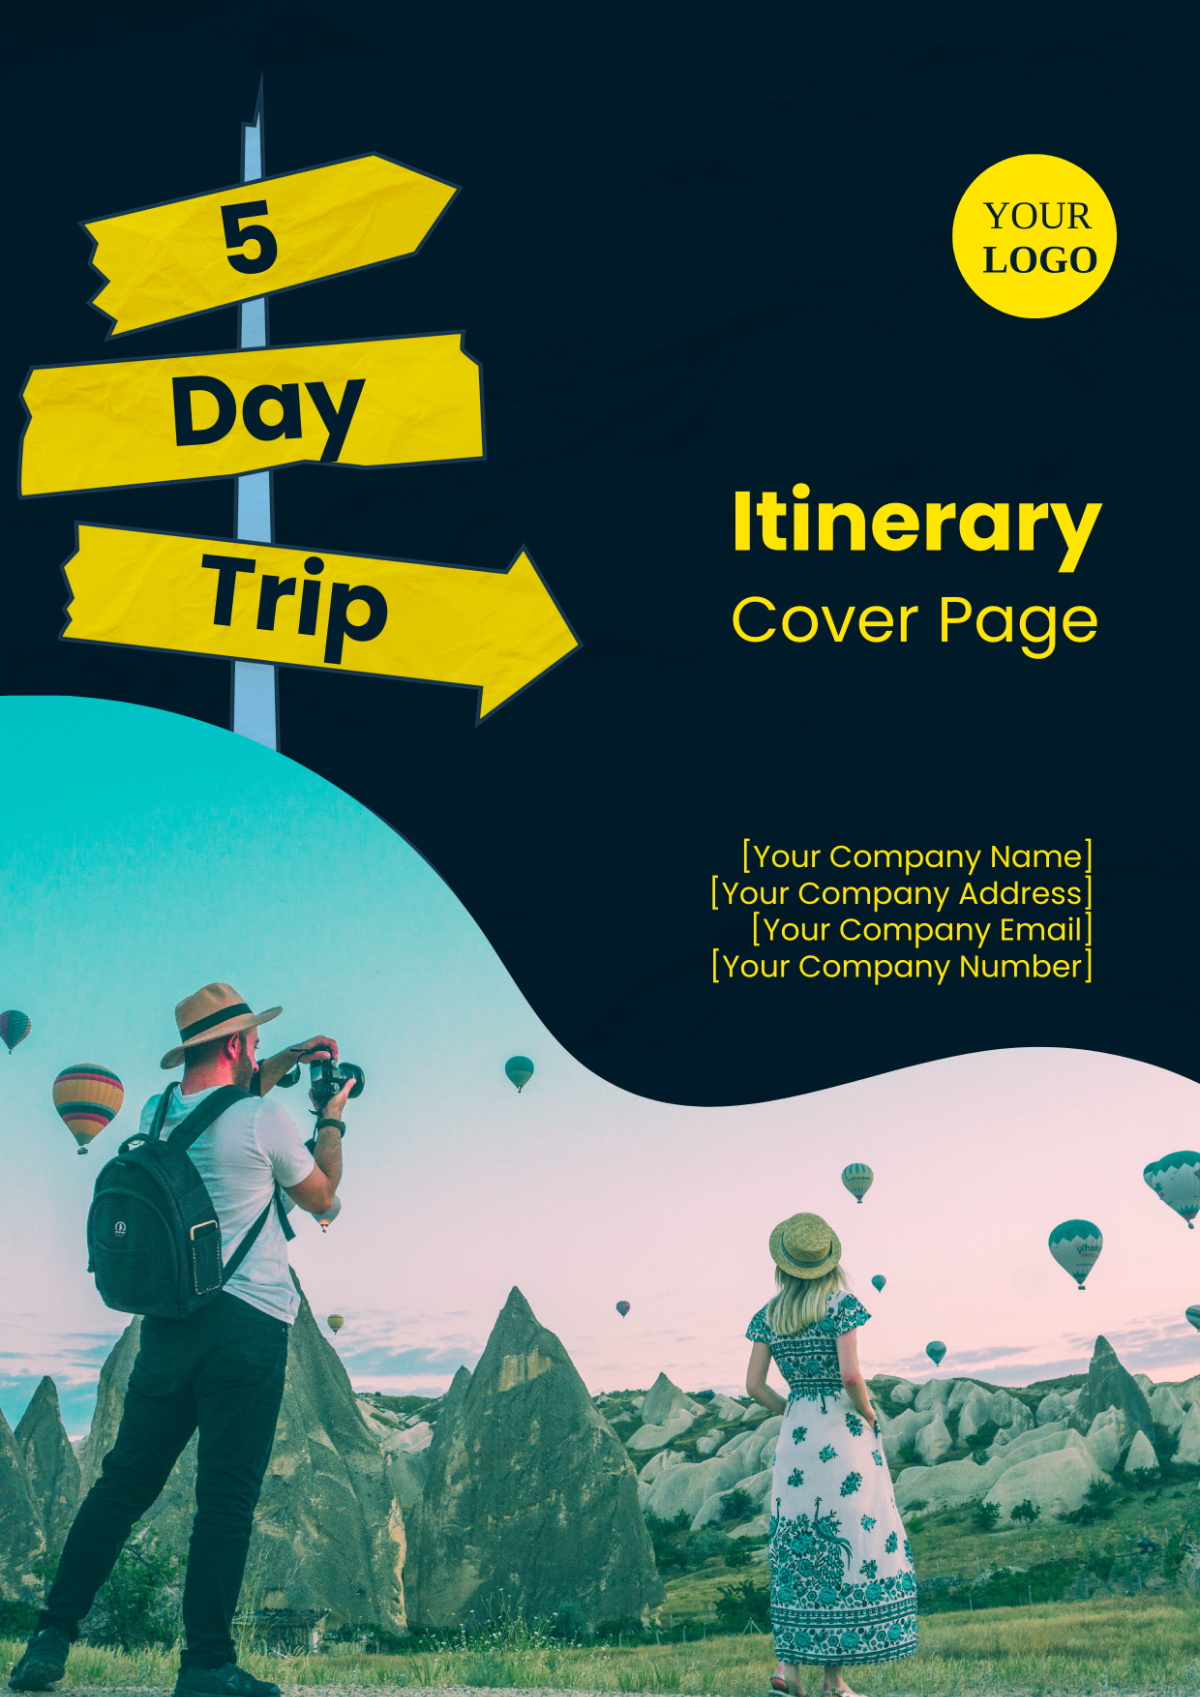 5 Day Trip Itinerary Cover Page